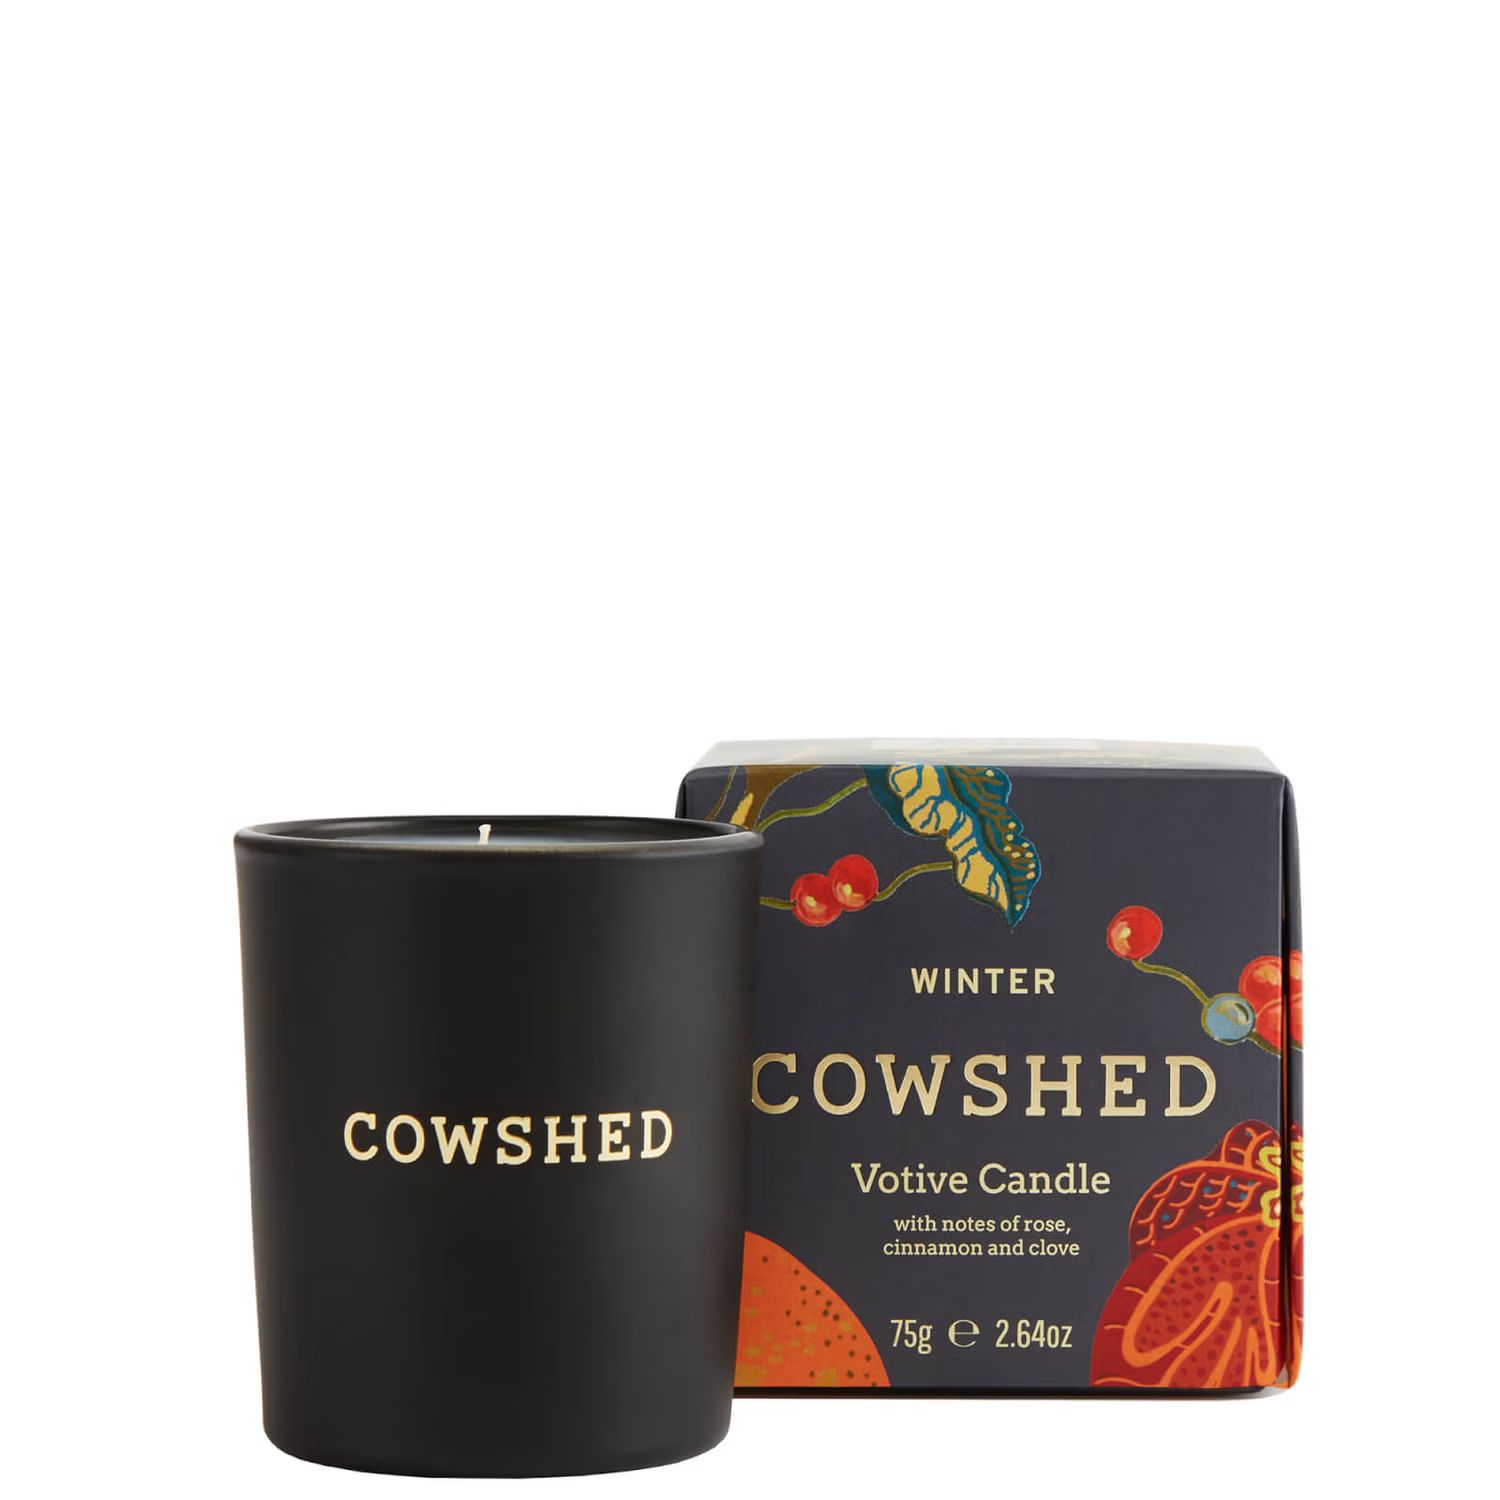 Cowshed Winter Votive Candle 75g | Dermstore (US)